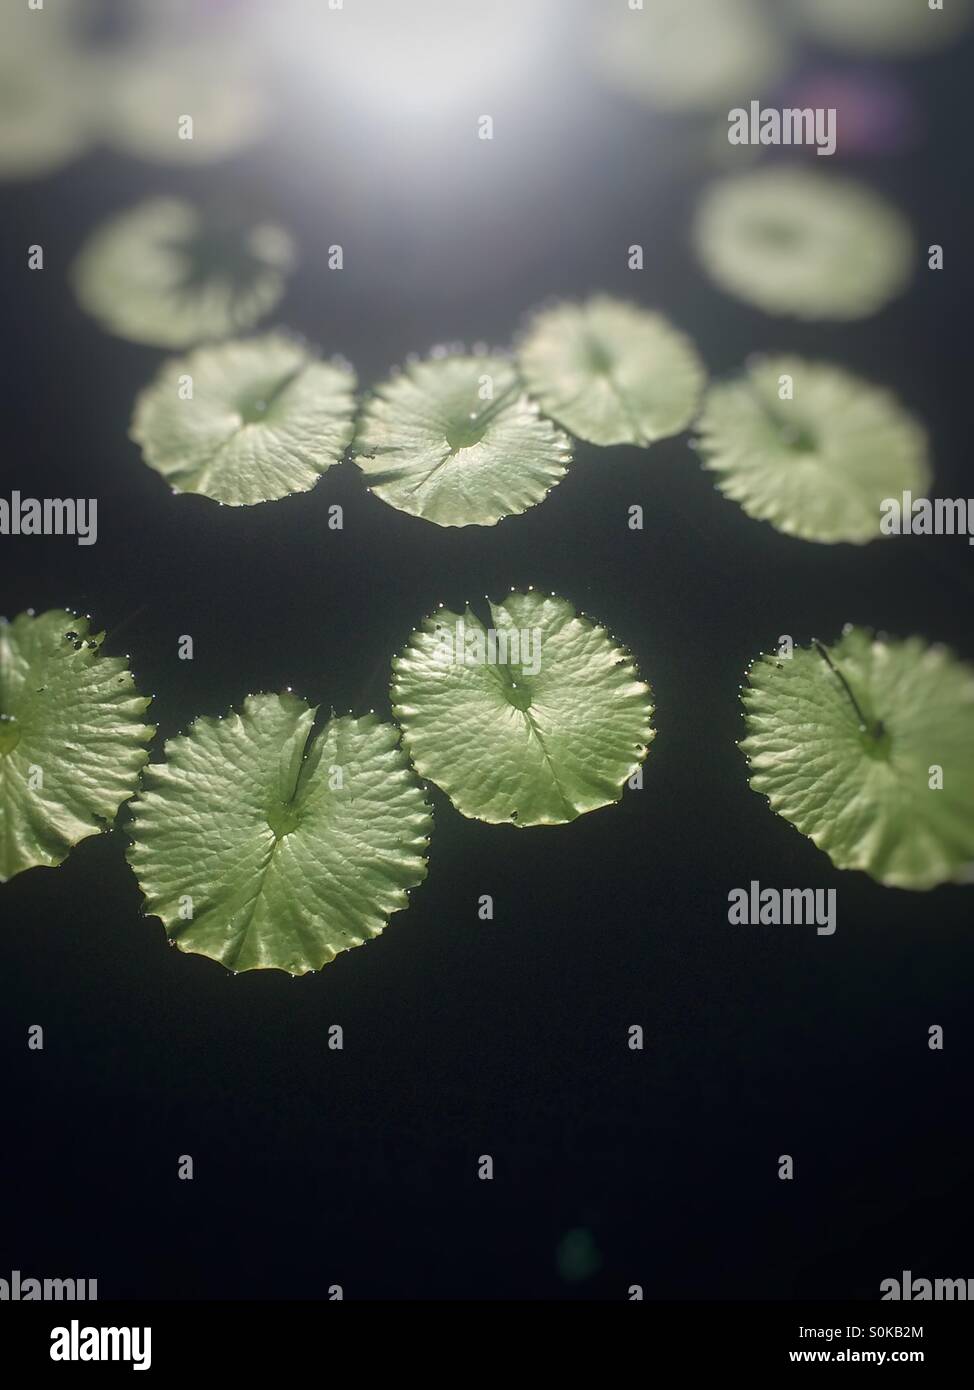 Lily pads Stock Photo